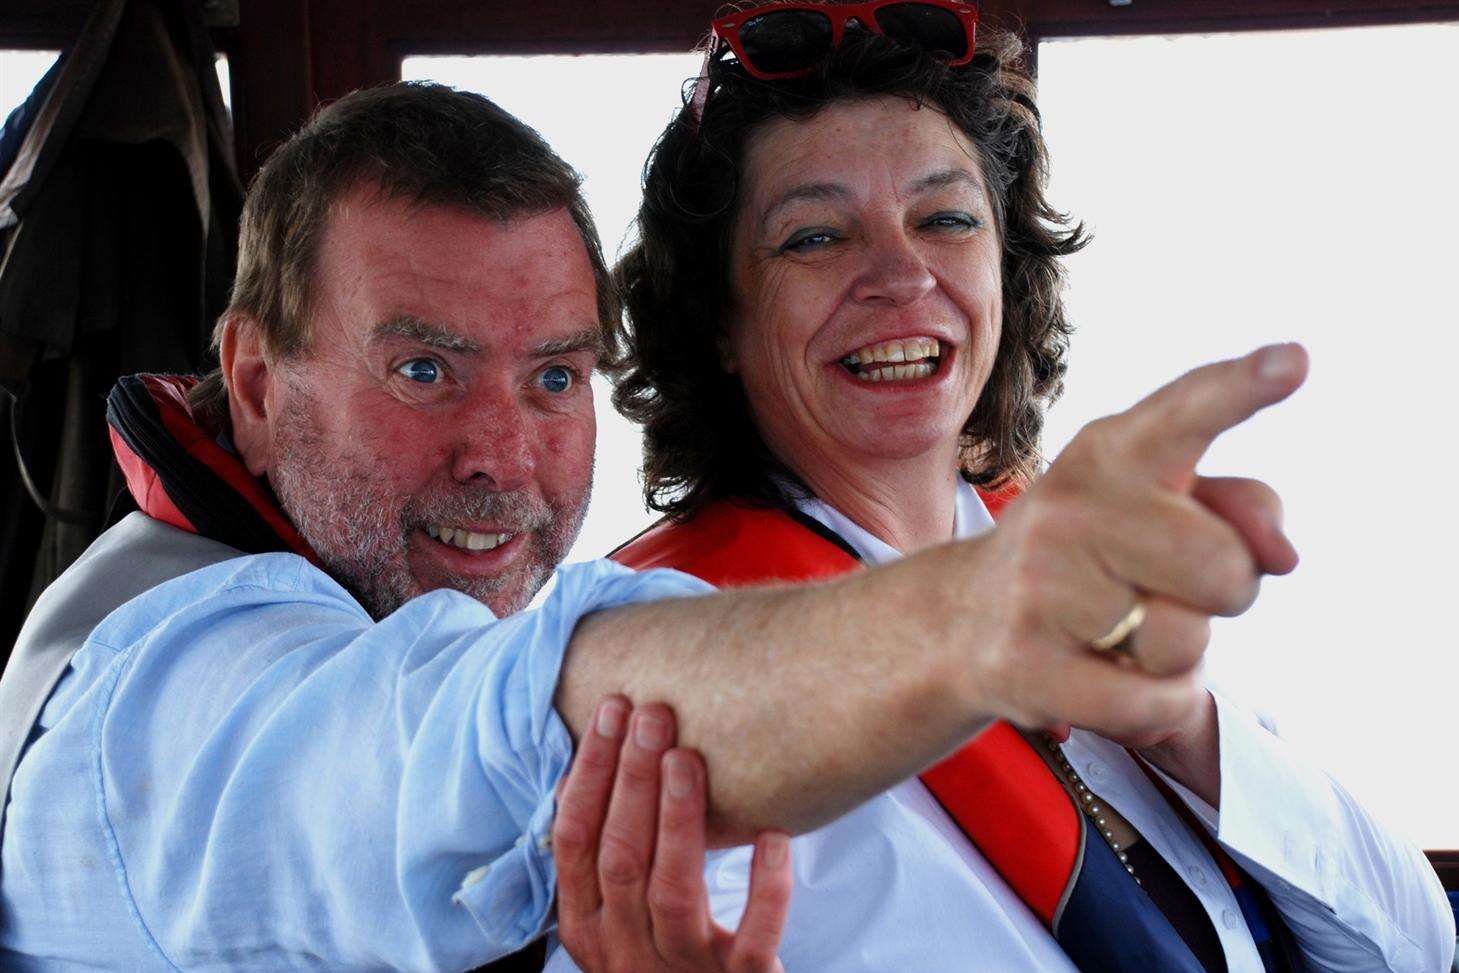 Timothy Spall and his wife Shane, taken just after their dramatic rescue off Queenborough in 2011. Picture: Paul Crompton cromptontv@yahoo.co.uk